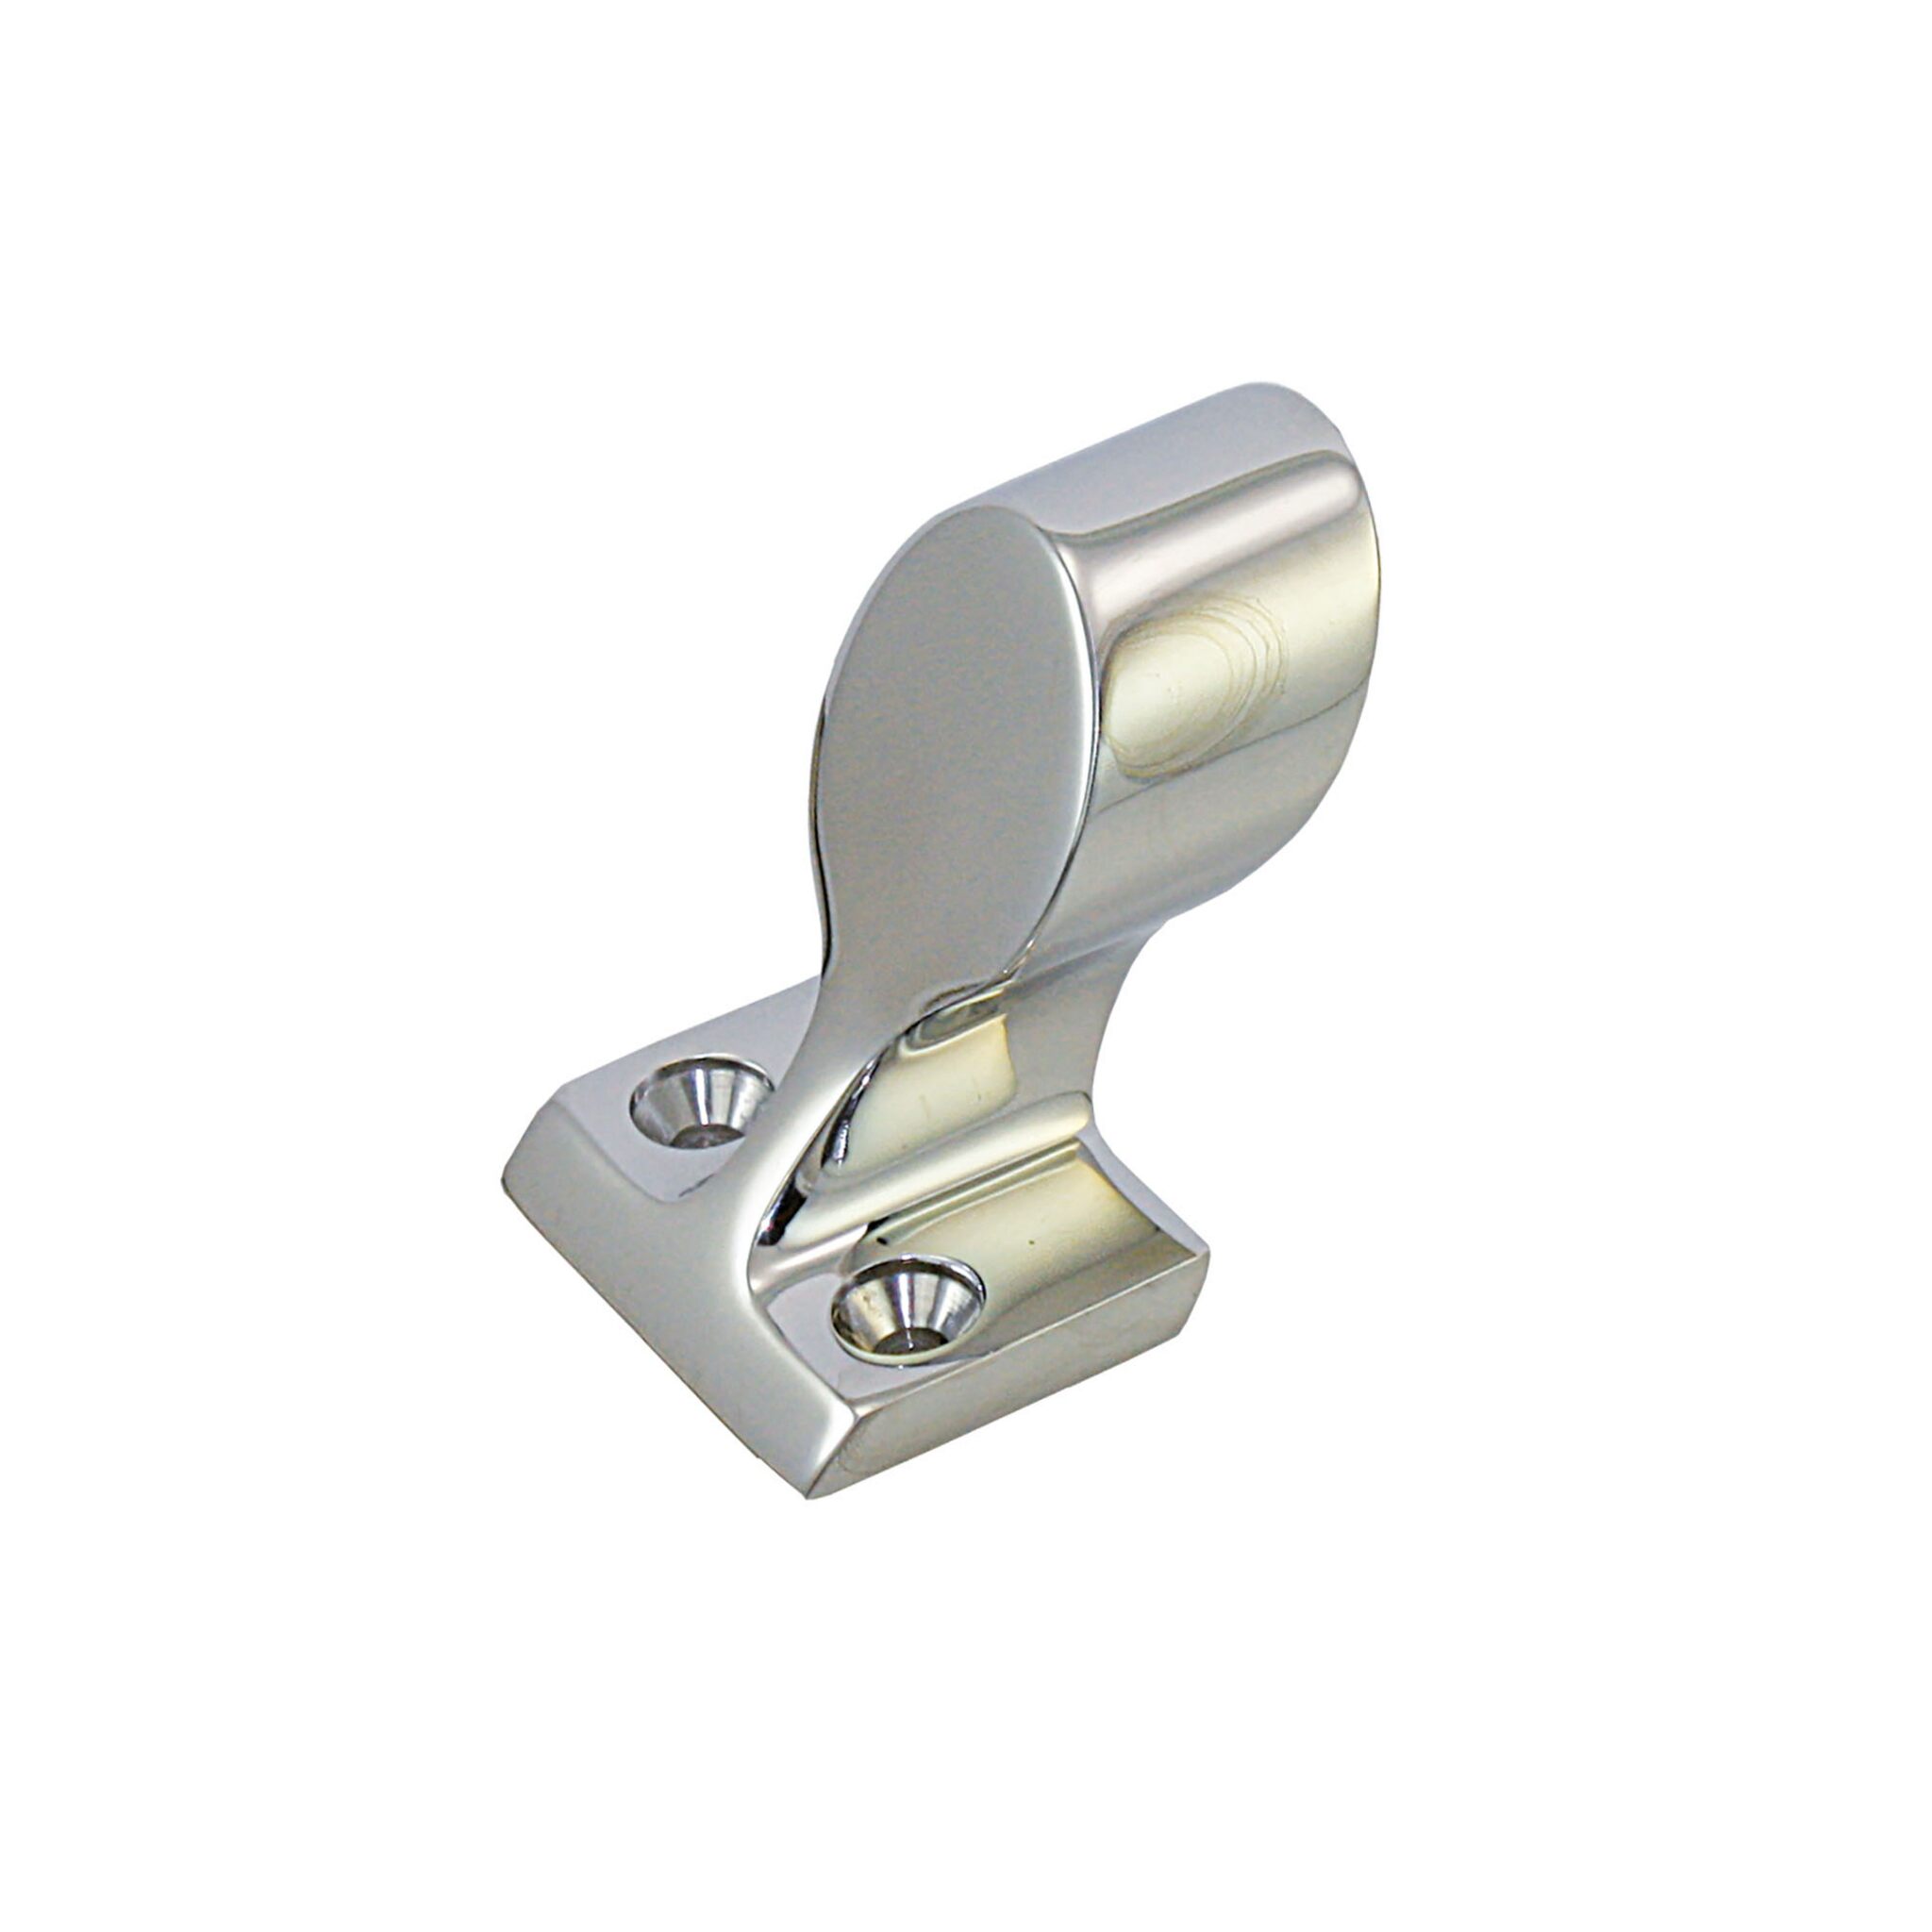 Handrail end piece stainless steel